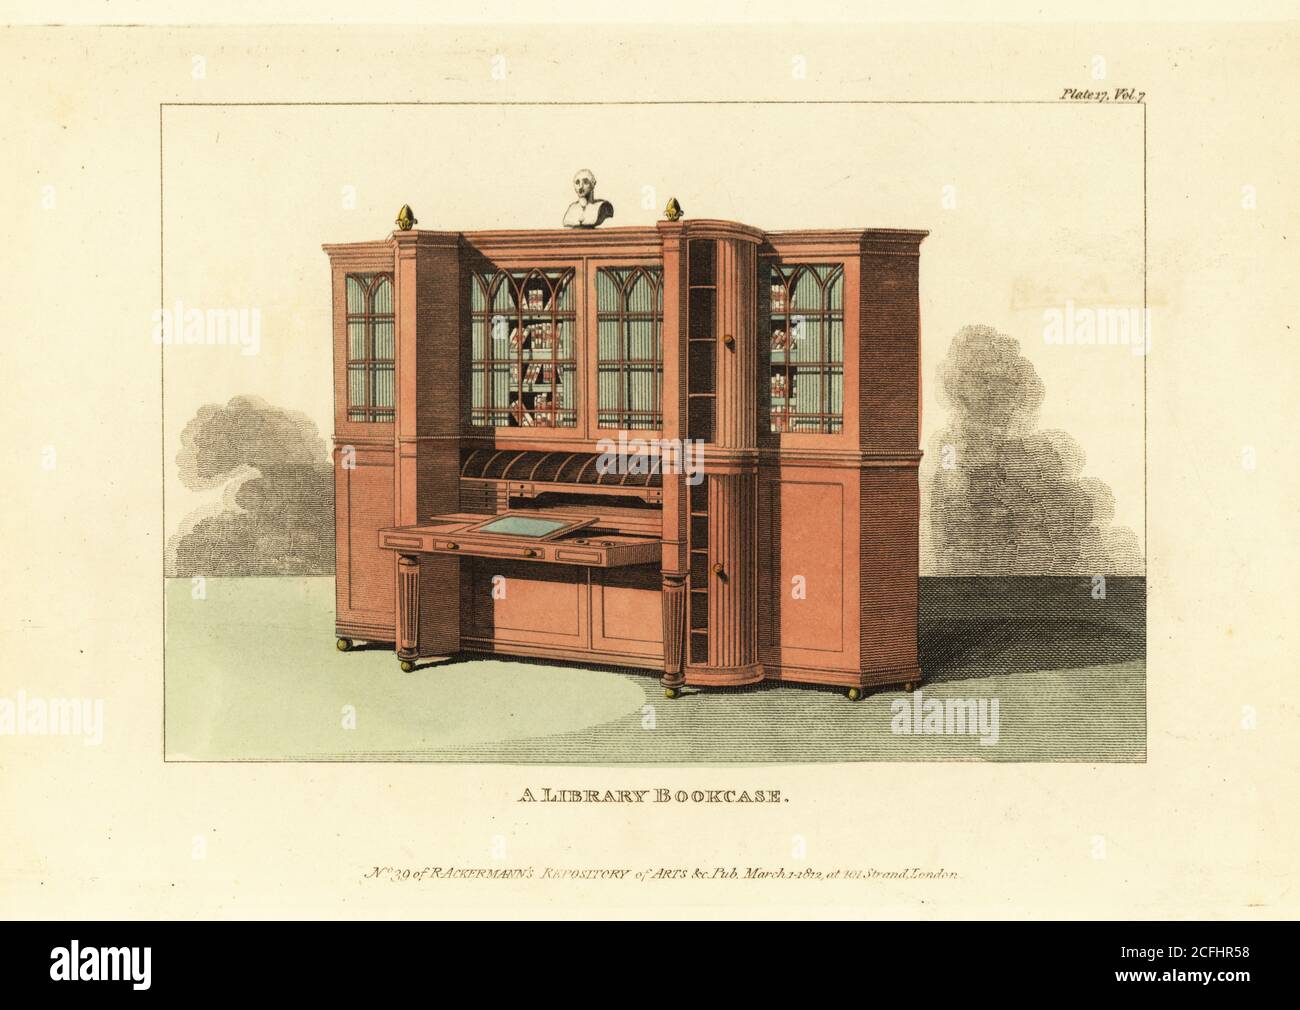 Regency-era library bookcase with tambour circular cupboards and fold-out writing desk. Designed and manufactured by Thomas Morgan and Joseph Sanders, Catherine Street, Strand, 1812. Handcoloured copperplate engraving from The Upholsterer's and Cabinet-Maker's Repository consisting of seventy-six designs of modern and fashionable furniture, Rudolph Ackermann, London, 1830. Stock Photo